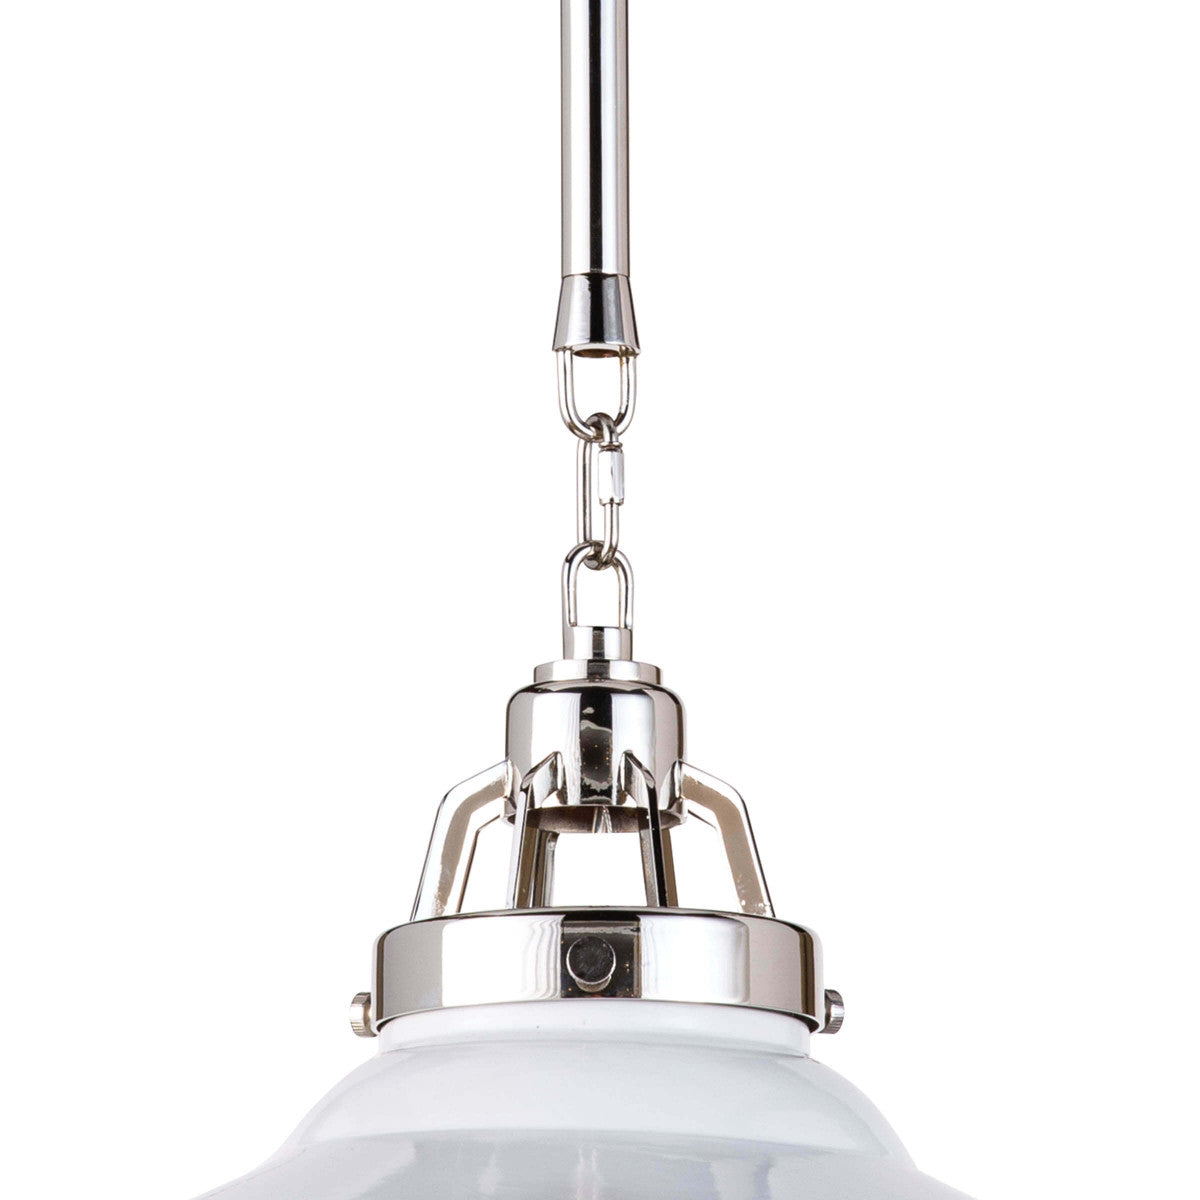 The polished nickel hardware and ceramic shade of this Maine White Ceramic Pendant instills a contemporary edge. It brings an antique charm to any modern-day kitchen or dining room  Size: 16"w x 16"d x 15"h Material: Ceramic